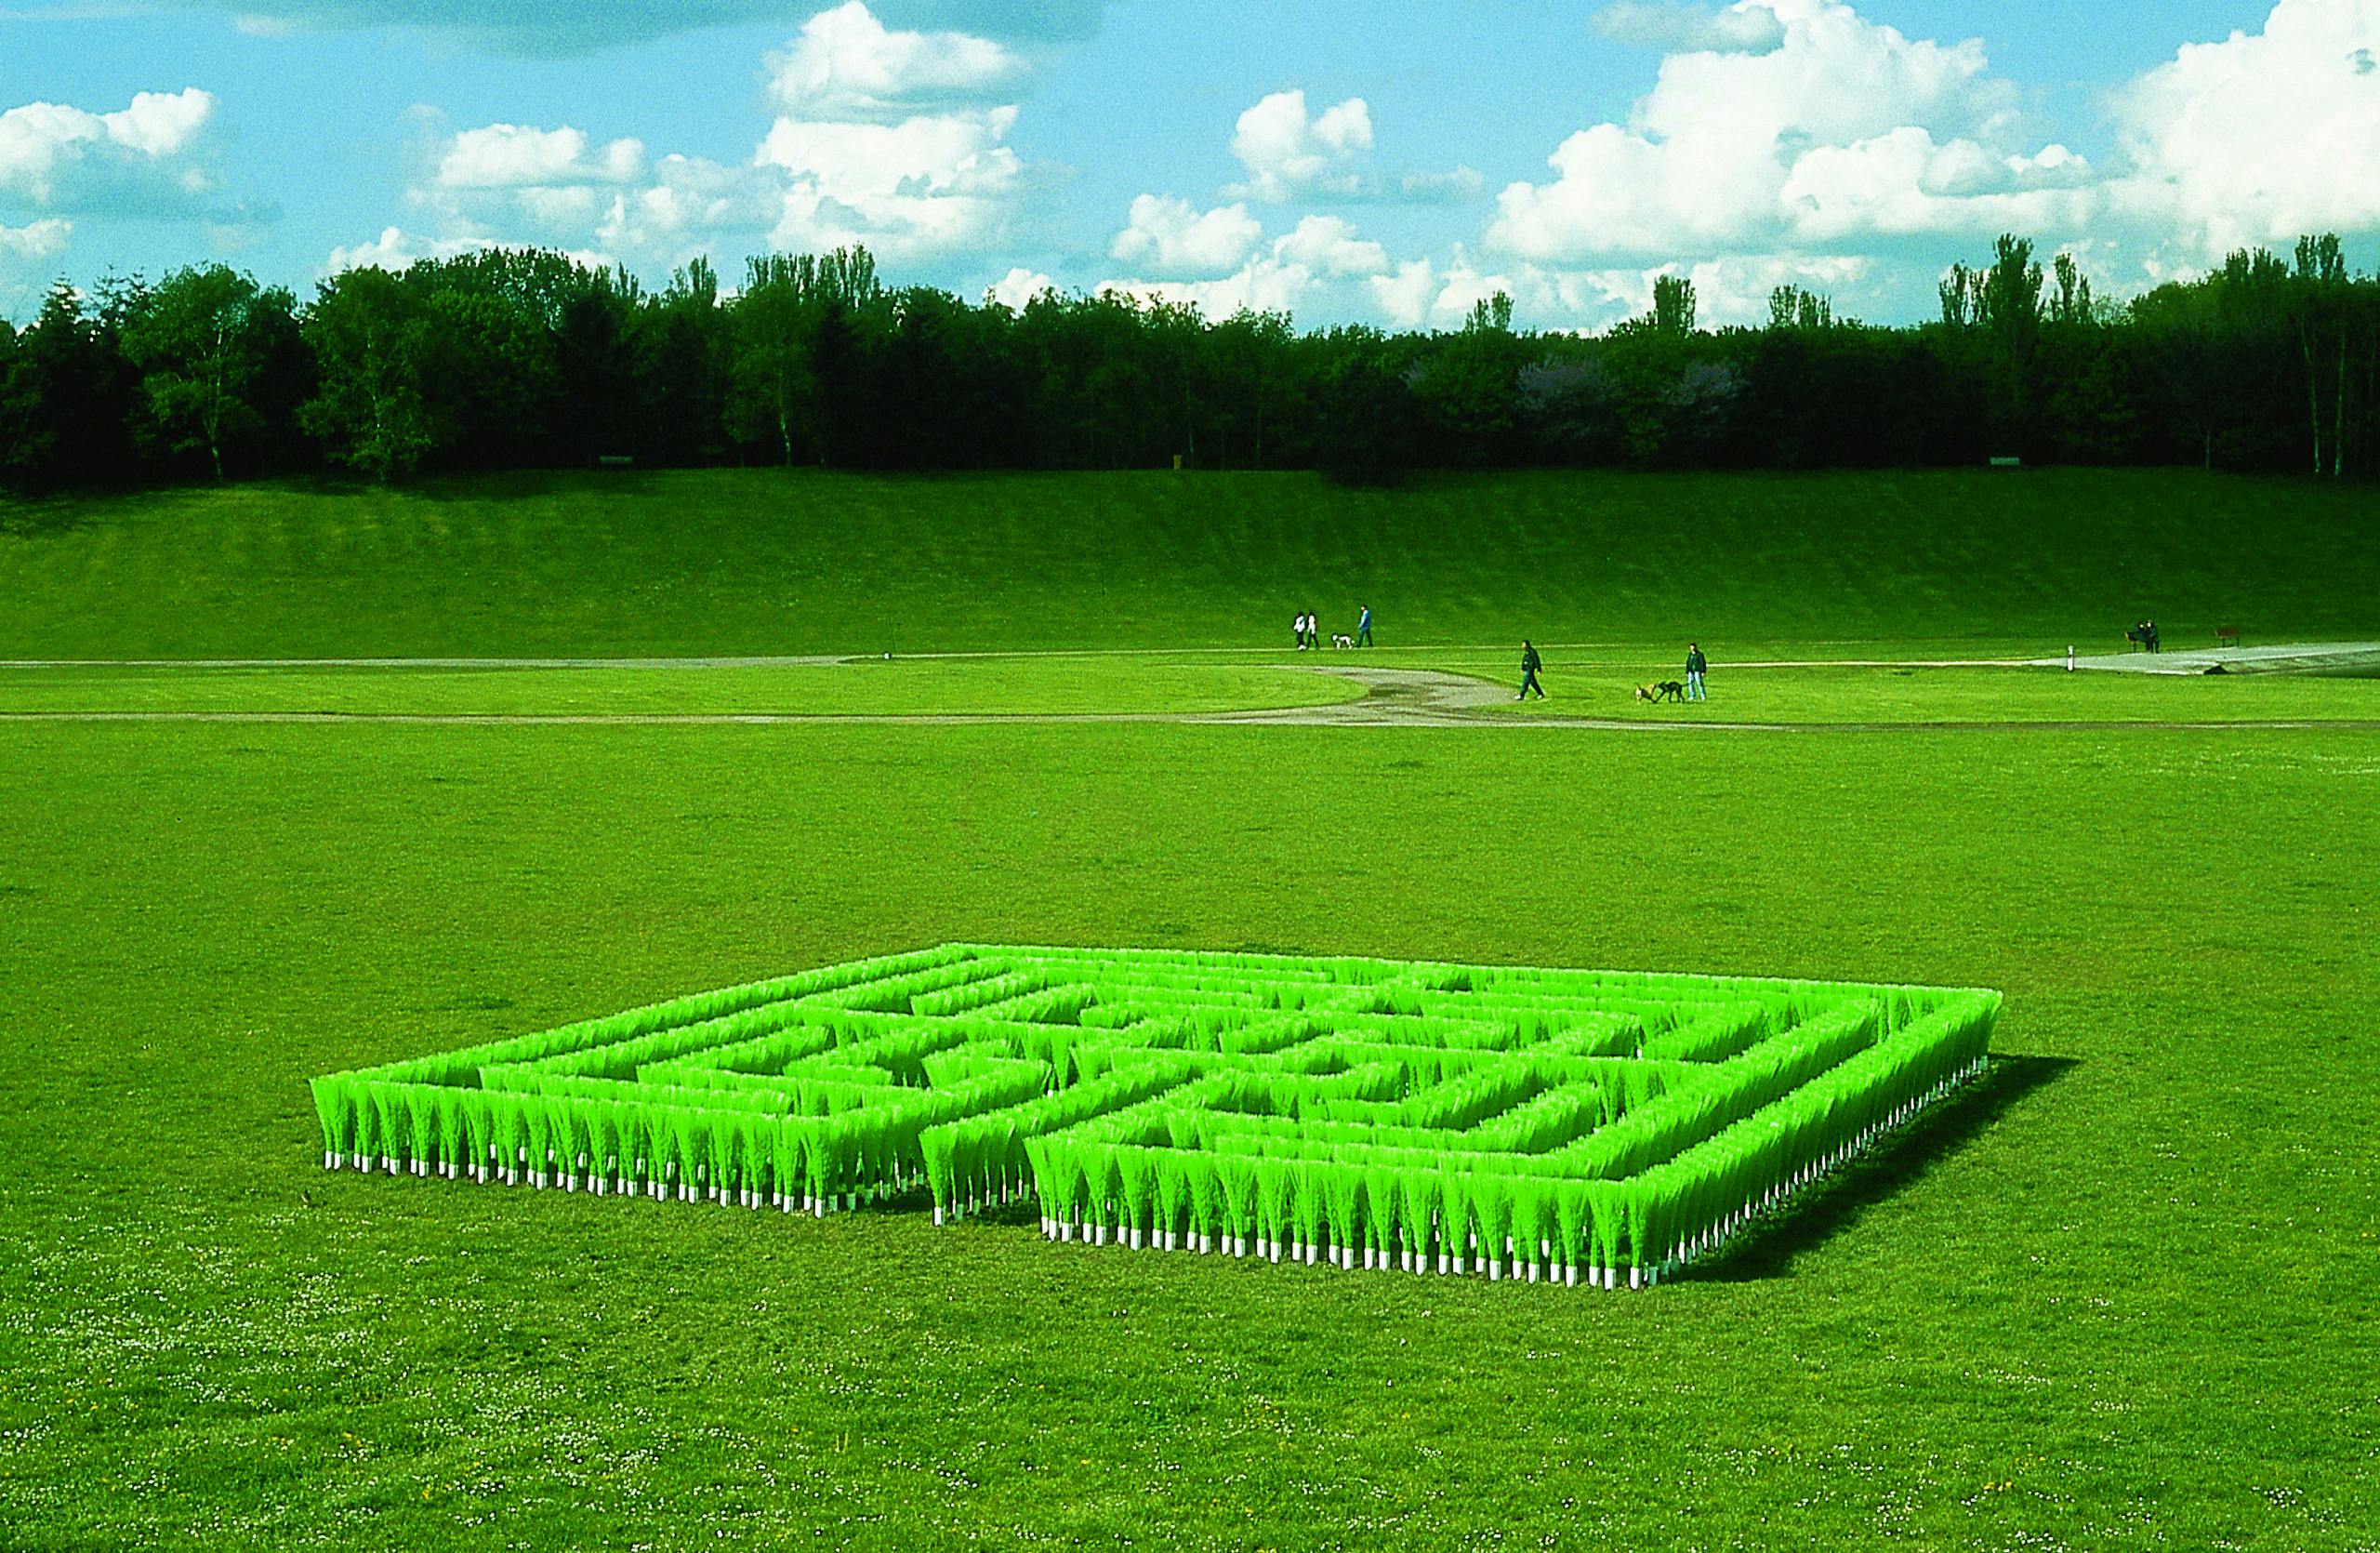 Installation of a square labyrinth made of green broom handles on a green area.